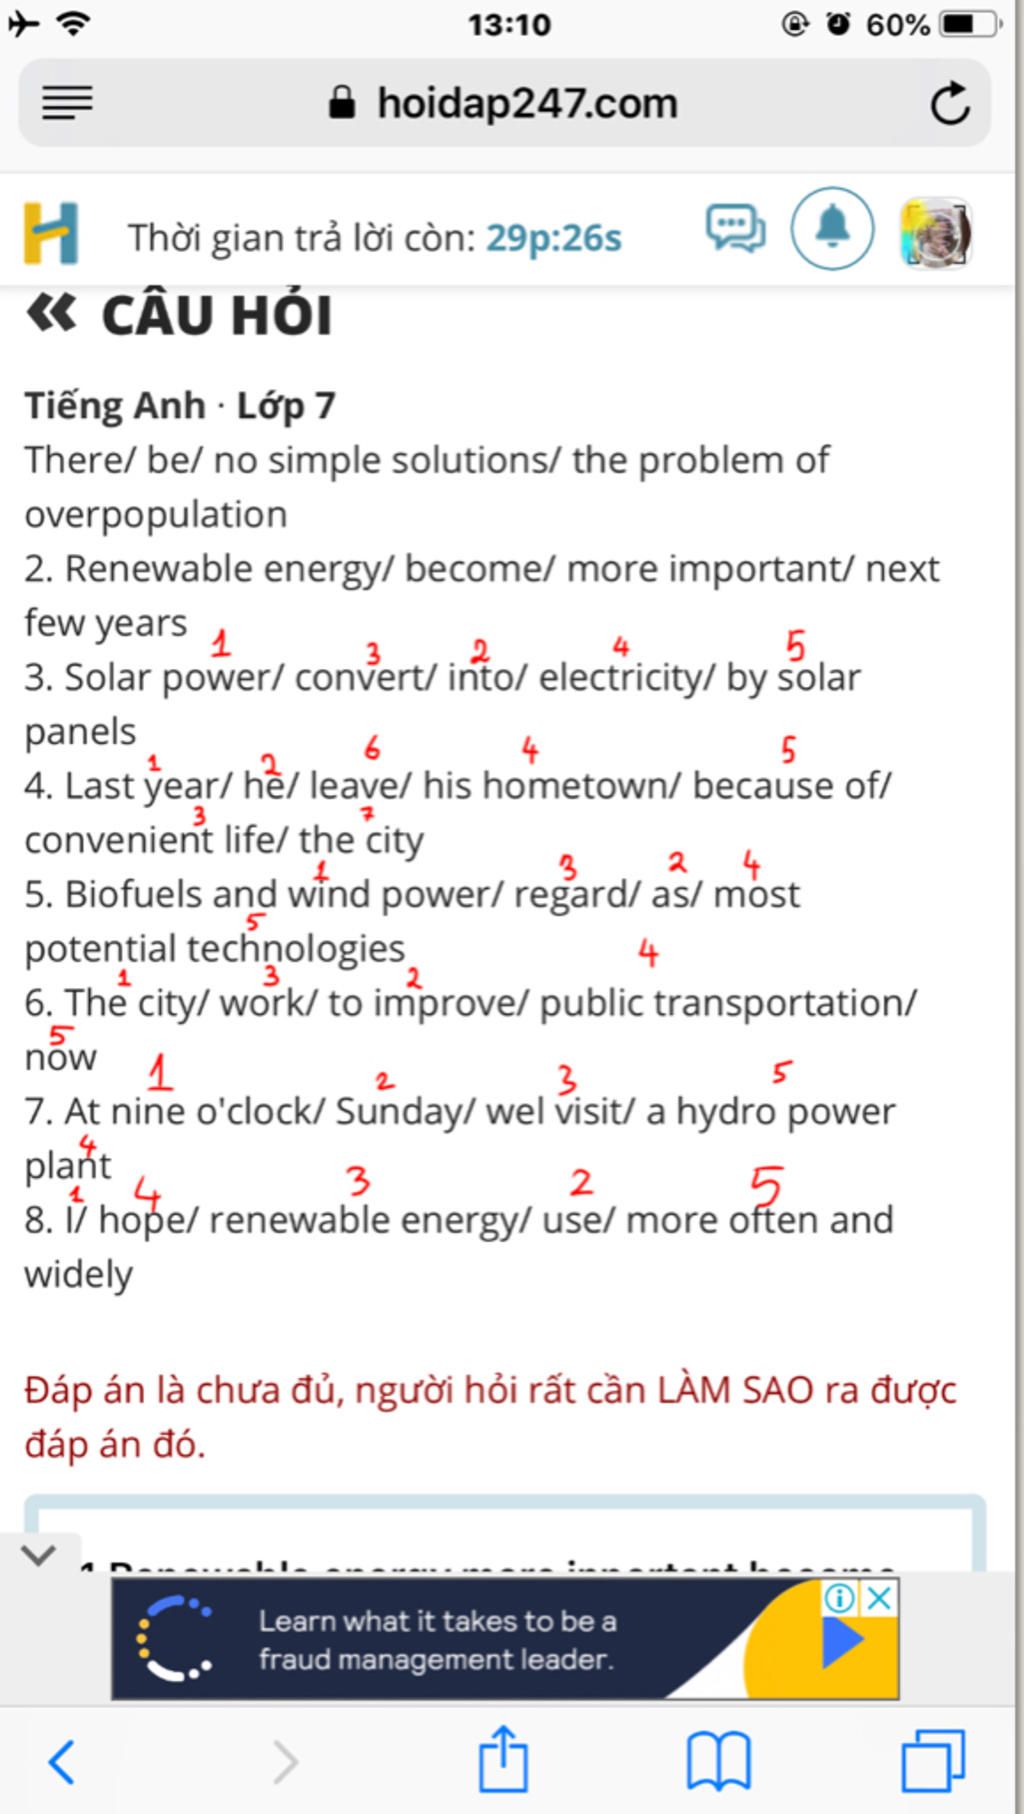 there-be-no-simple-solutions-the-problem-of-overpopulation-2-renewable-energy-become-more-import